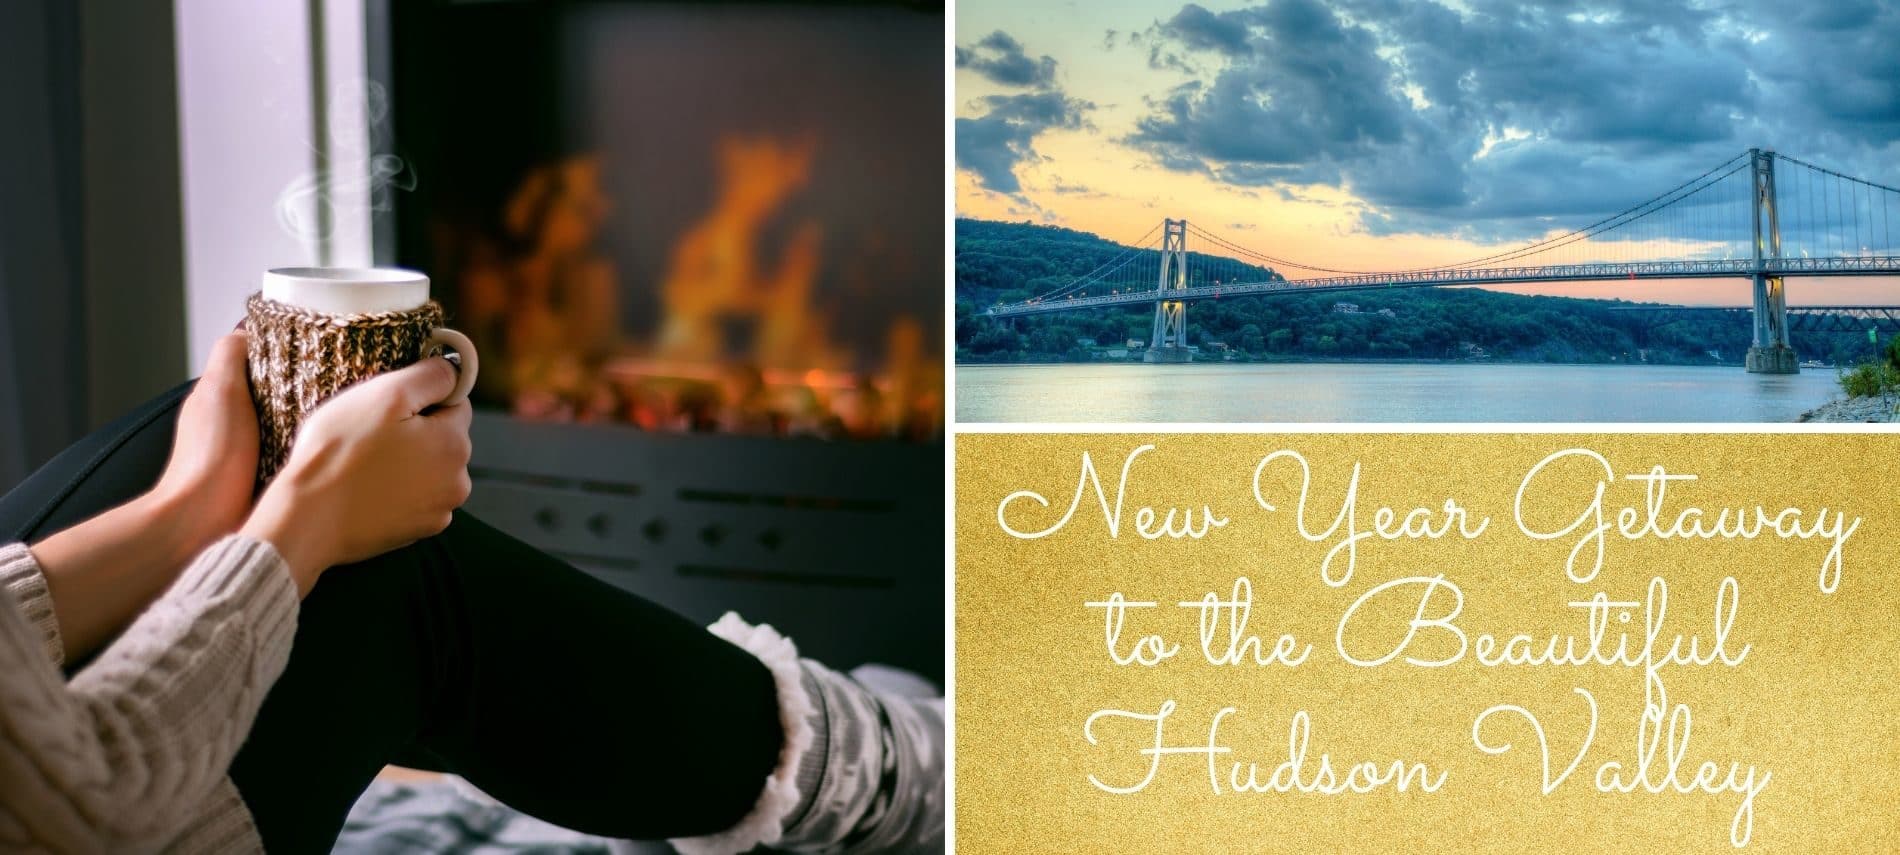 Grid image with woman sitting by a fireplace with a cup of coffee in her hand, a city bridge over water and text box